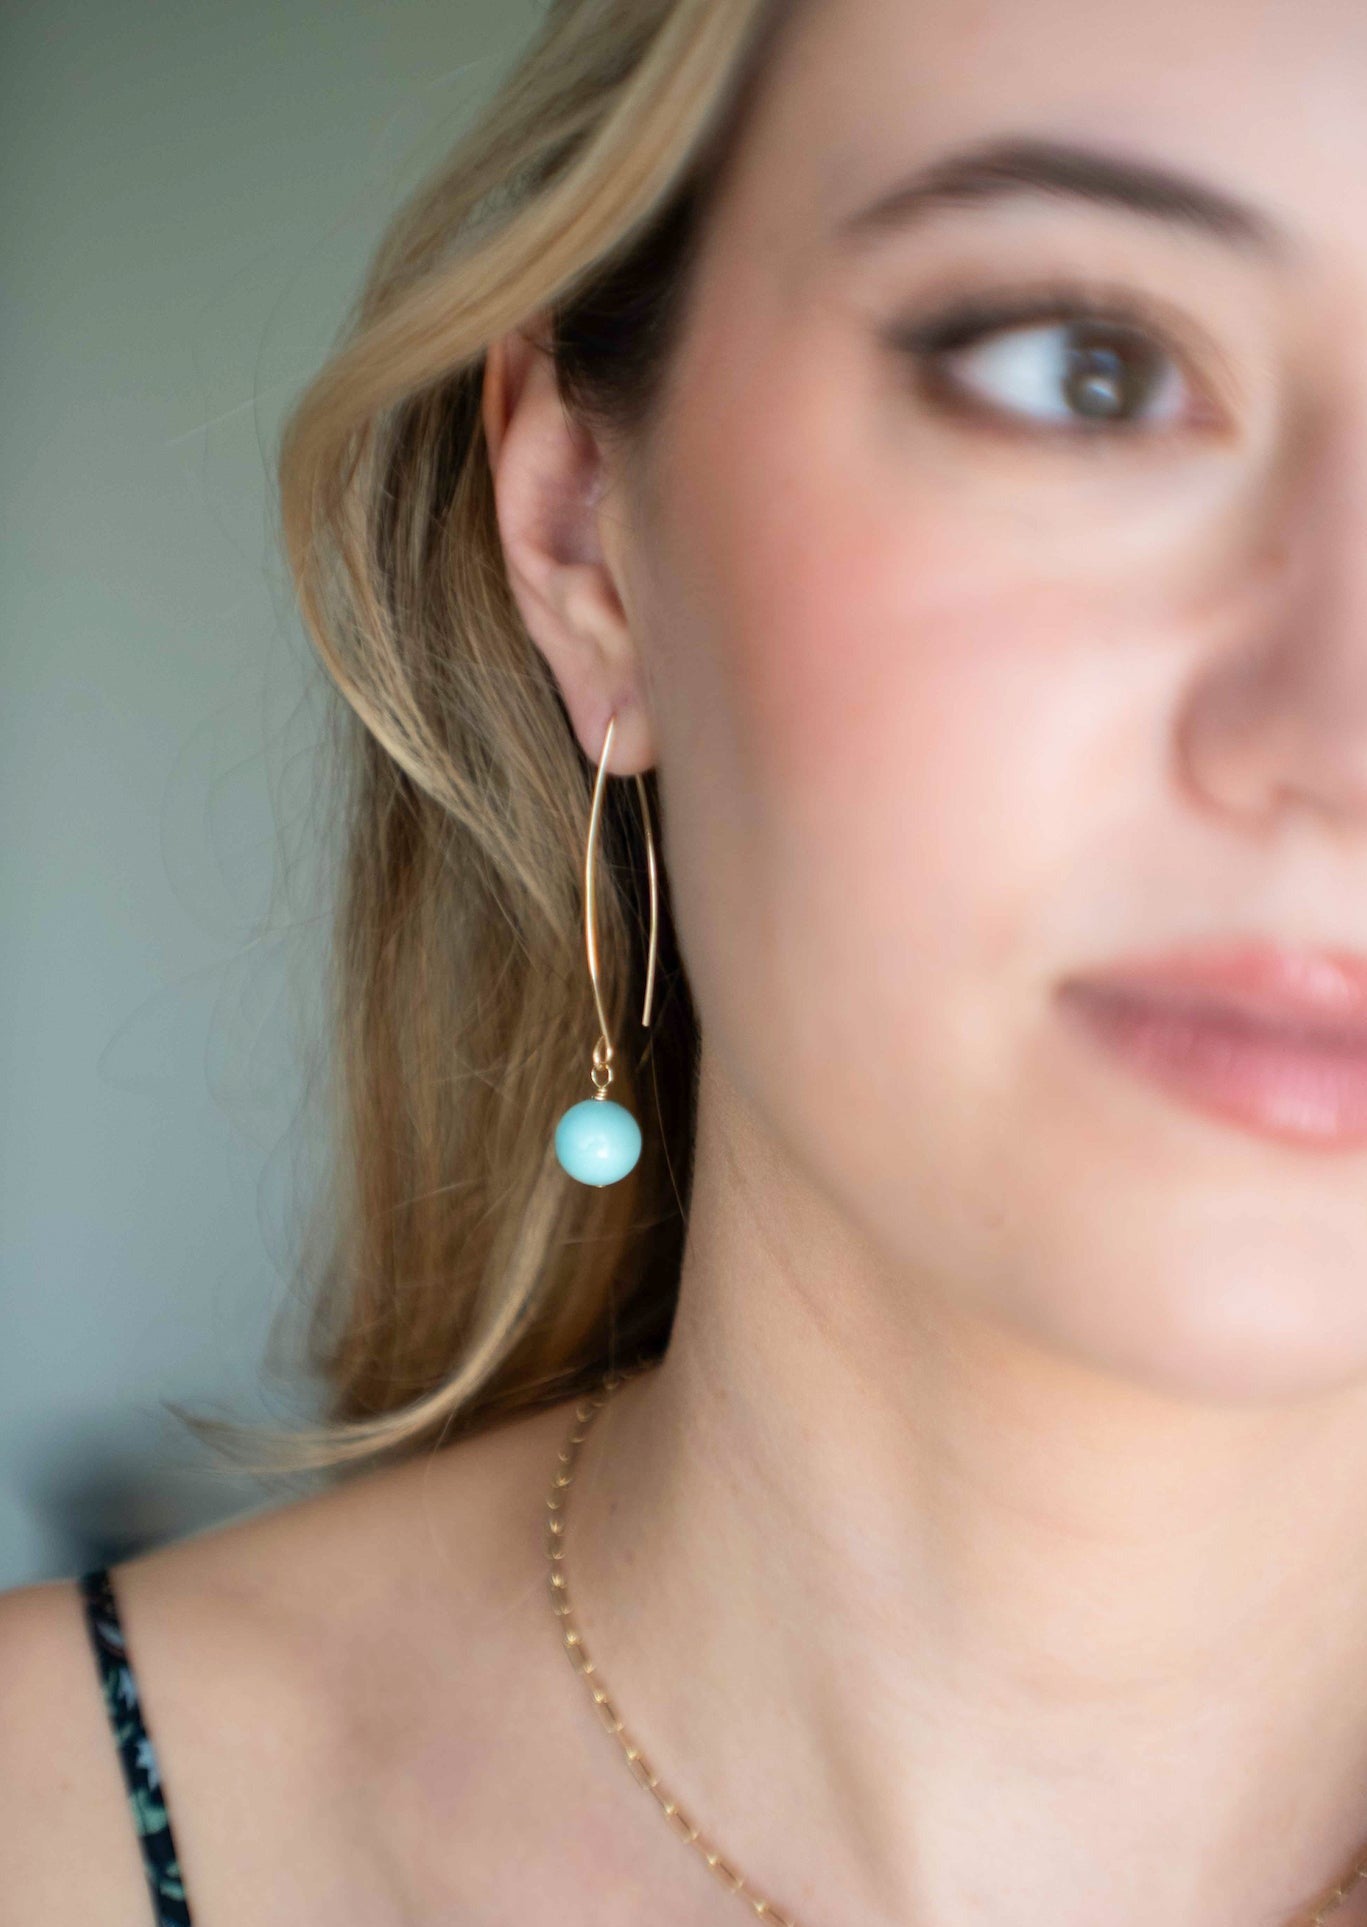 Long Turquoise Earrings Dangle, 14k Gold Filled, Rose Gold Filled Earrings, Minimalist Earrings, Unique Handmade Jewelry Gift for Her